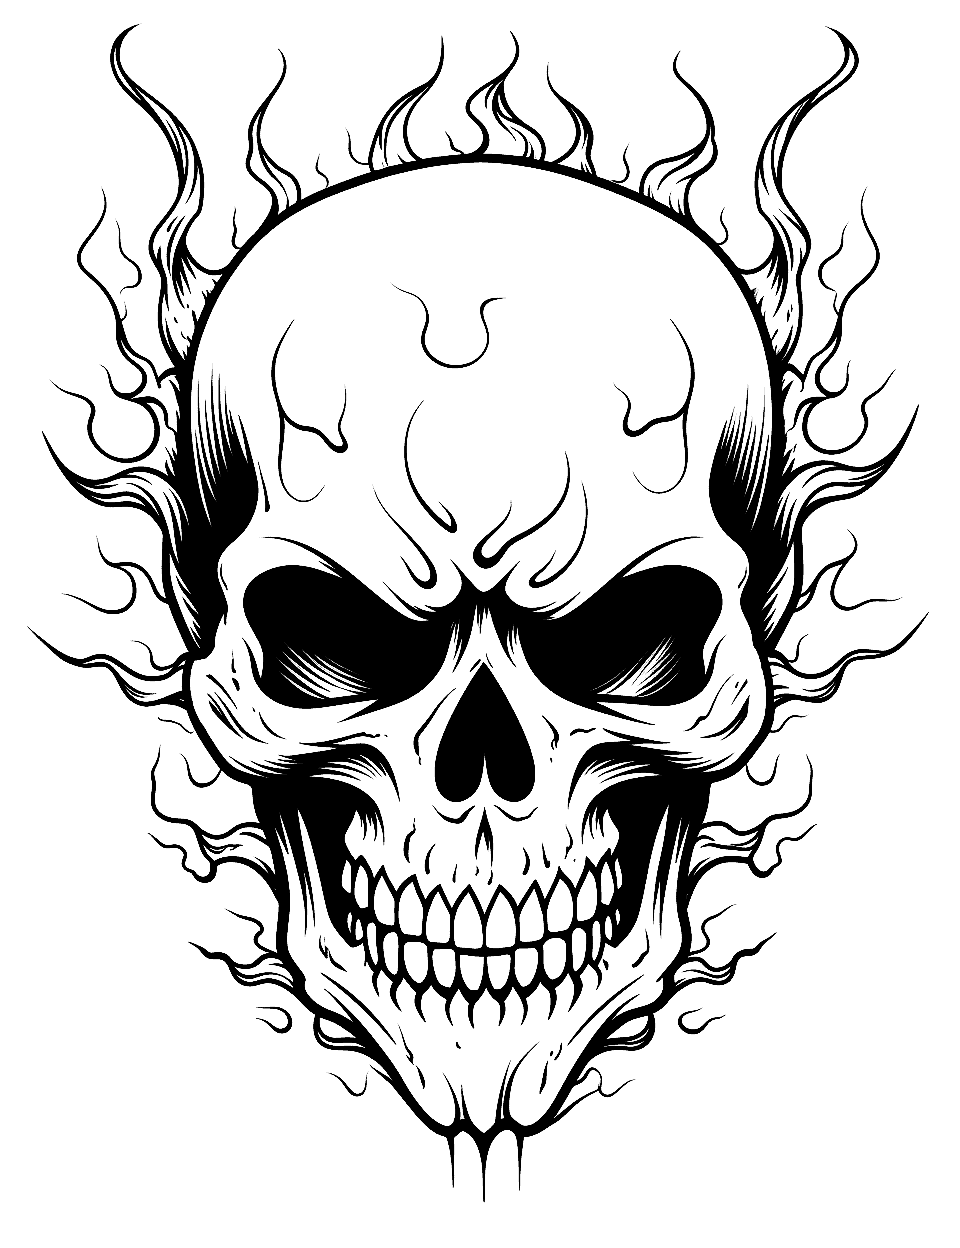 Fiery Skull Coloring Page - A skull with flames engulfing it from all around.